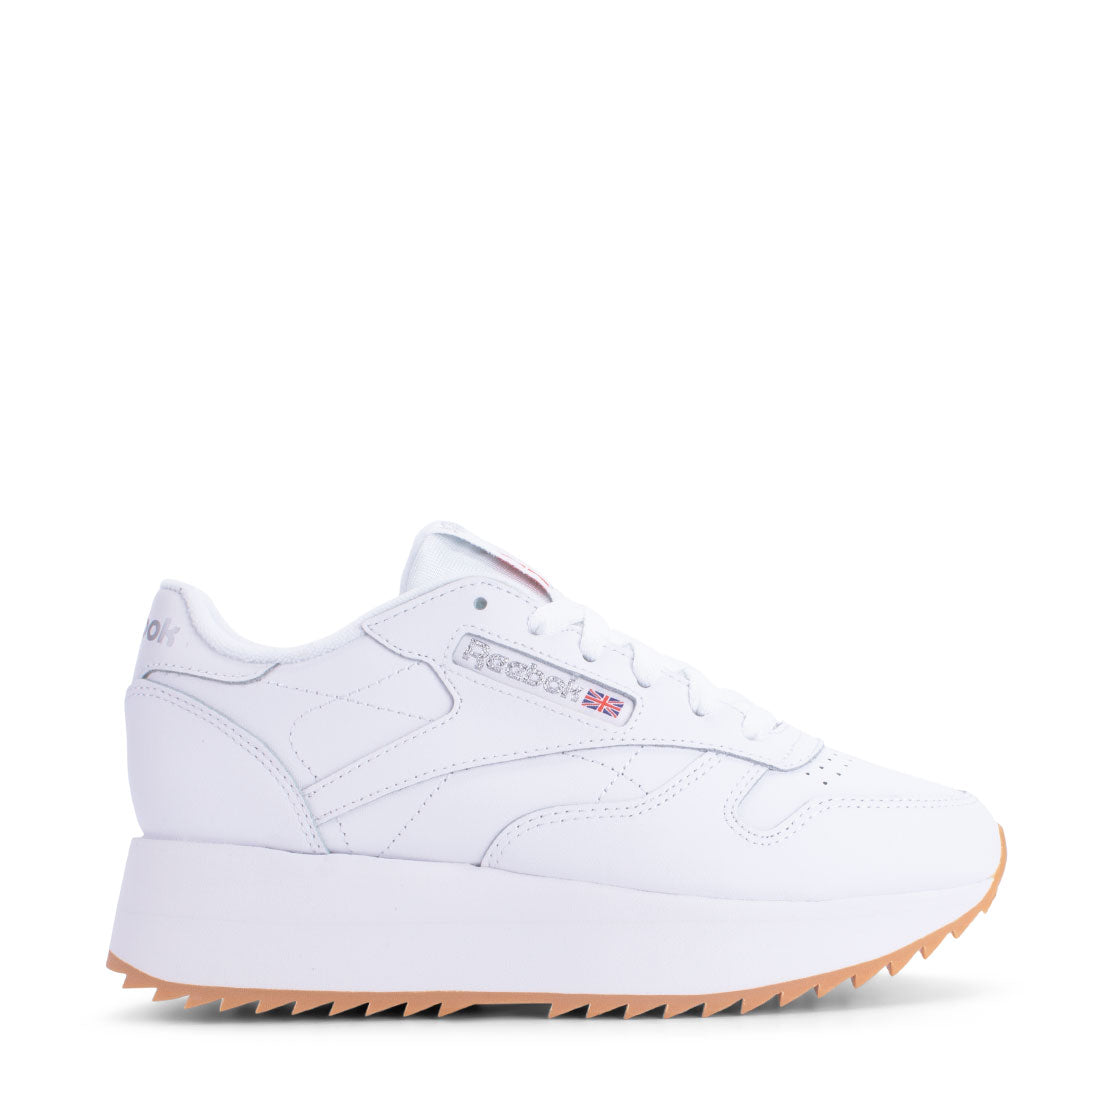 Reebok Classic Leather Double BR - DV6472-90